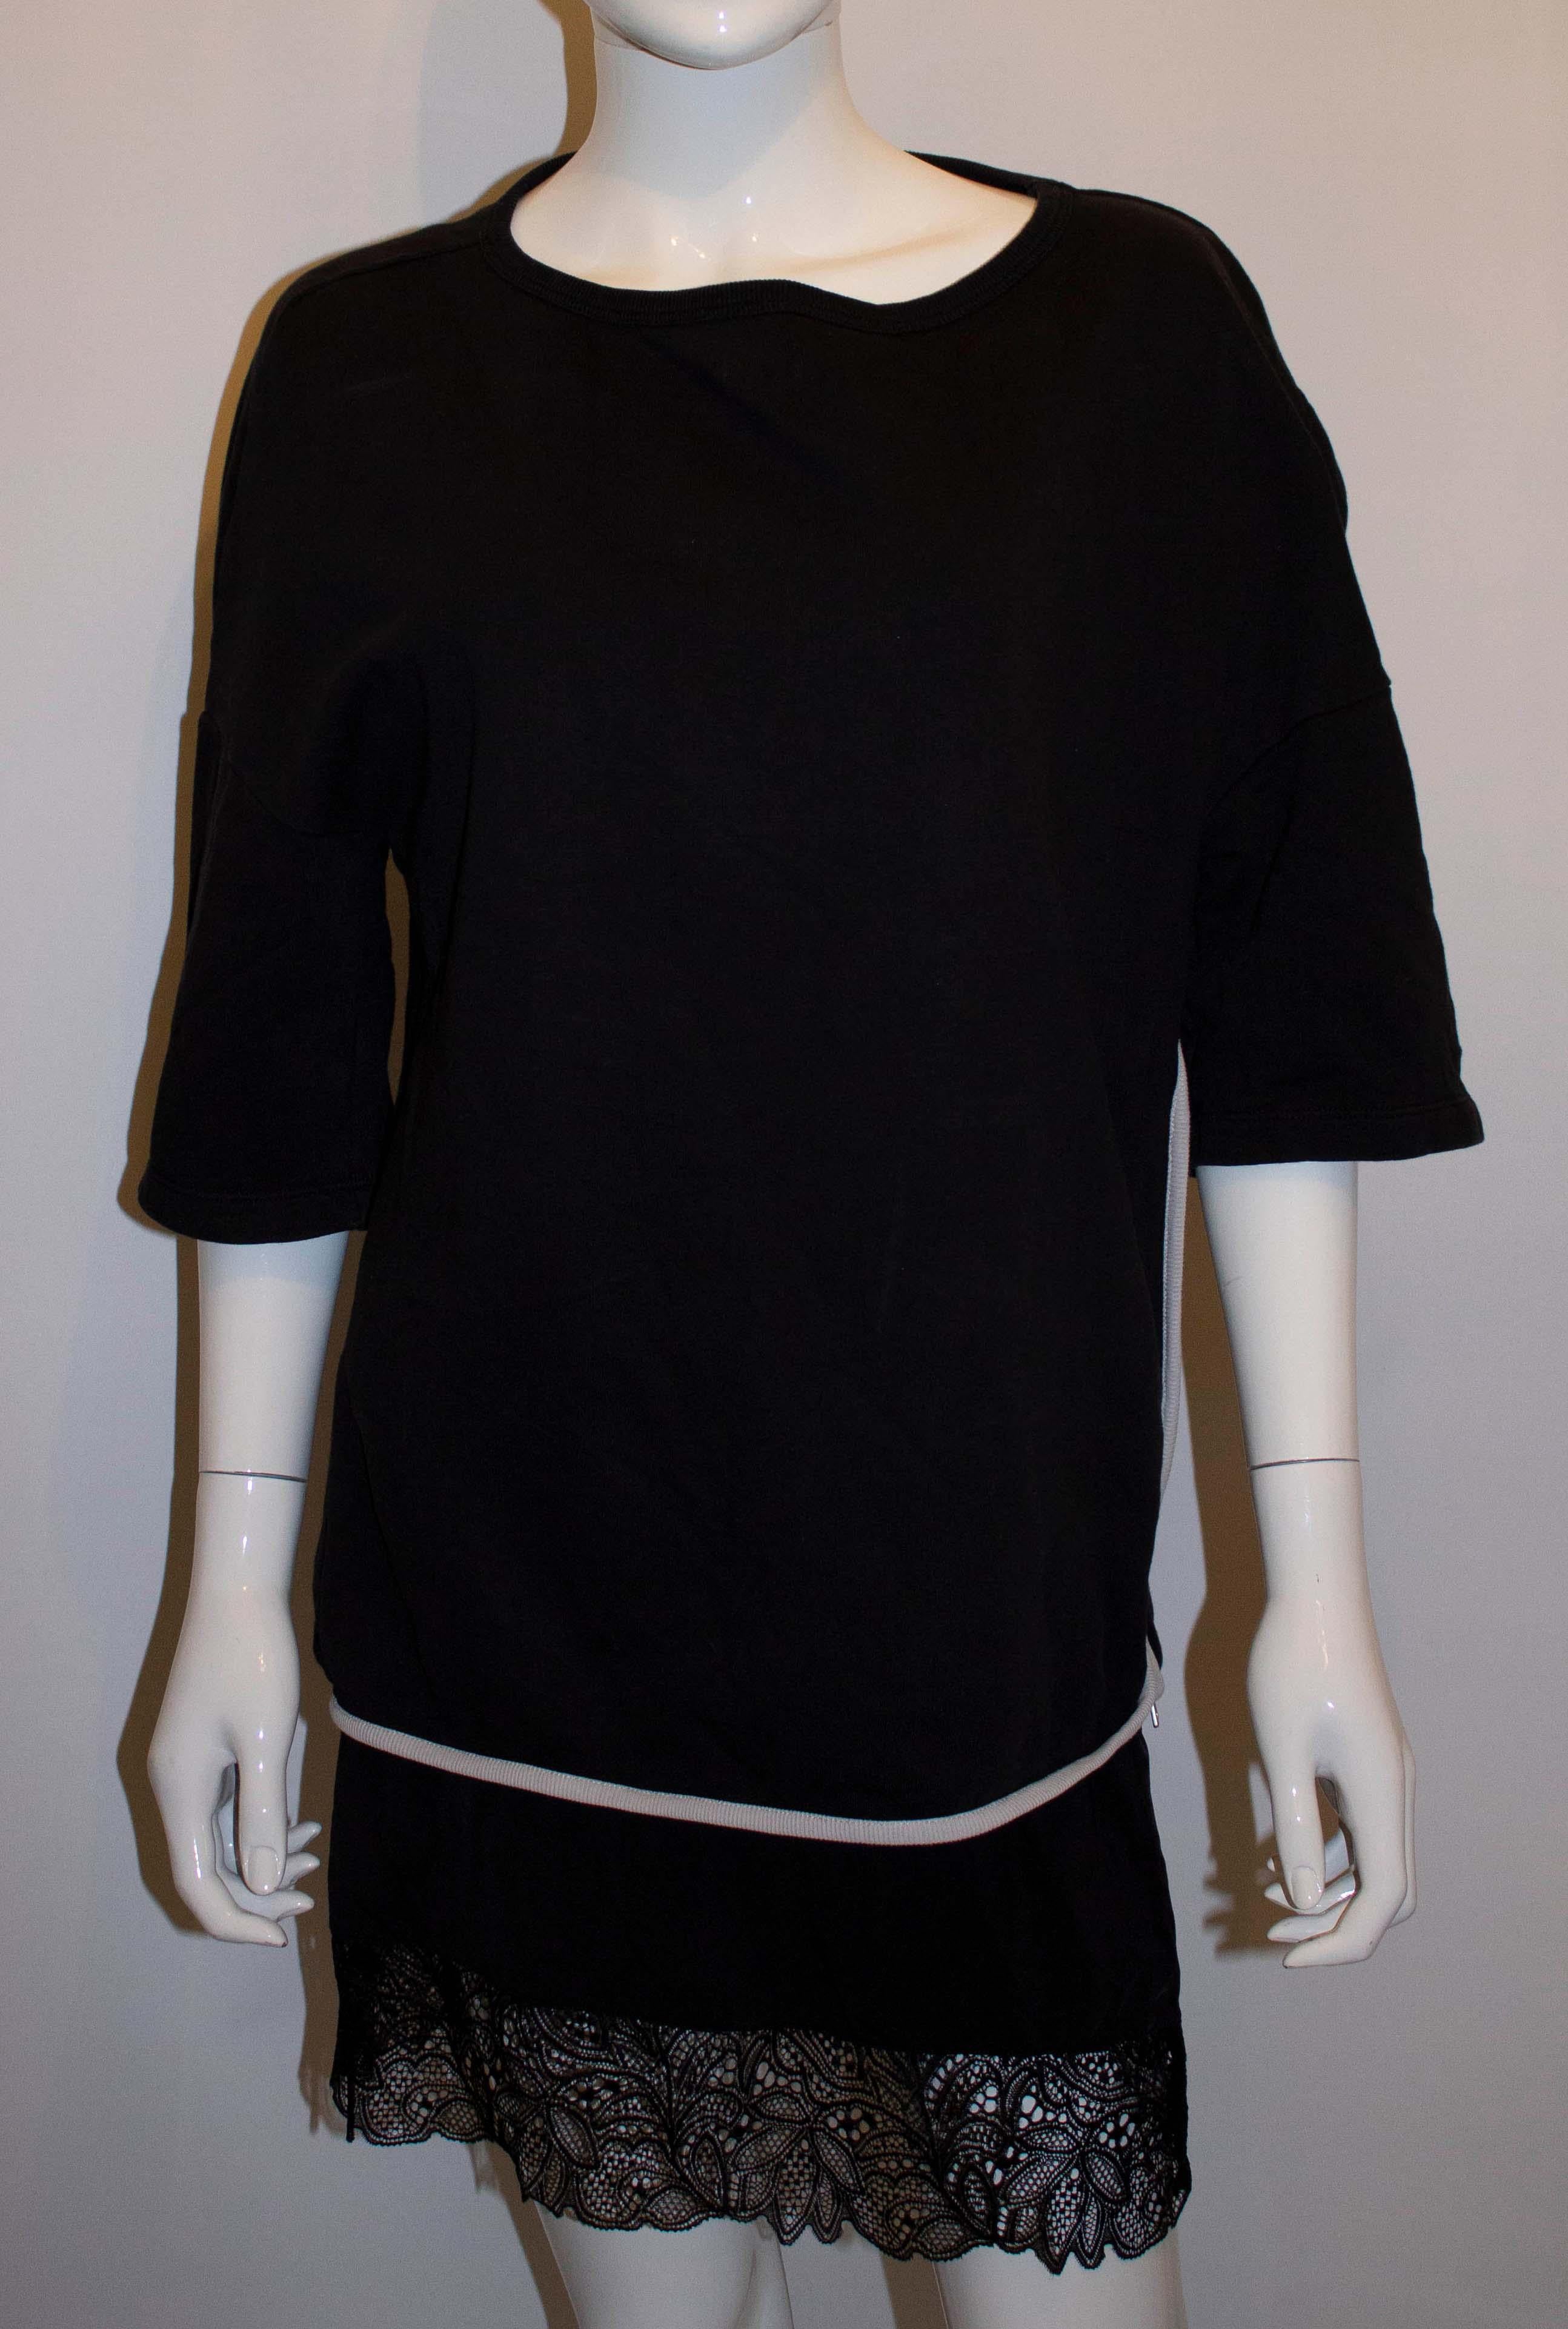 Dries van Noten Black Top with White Trim In Good Condition For Sale In London, GB